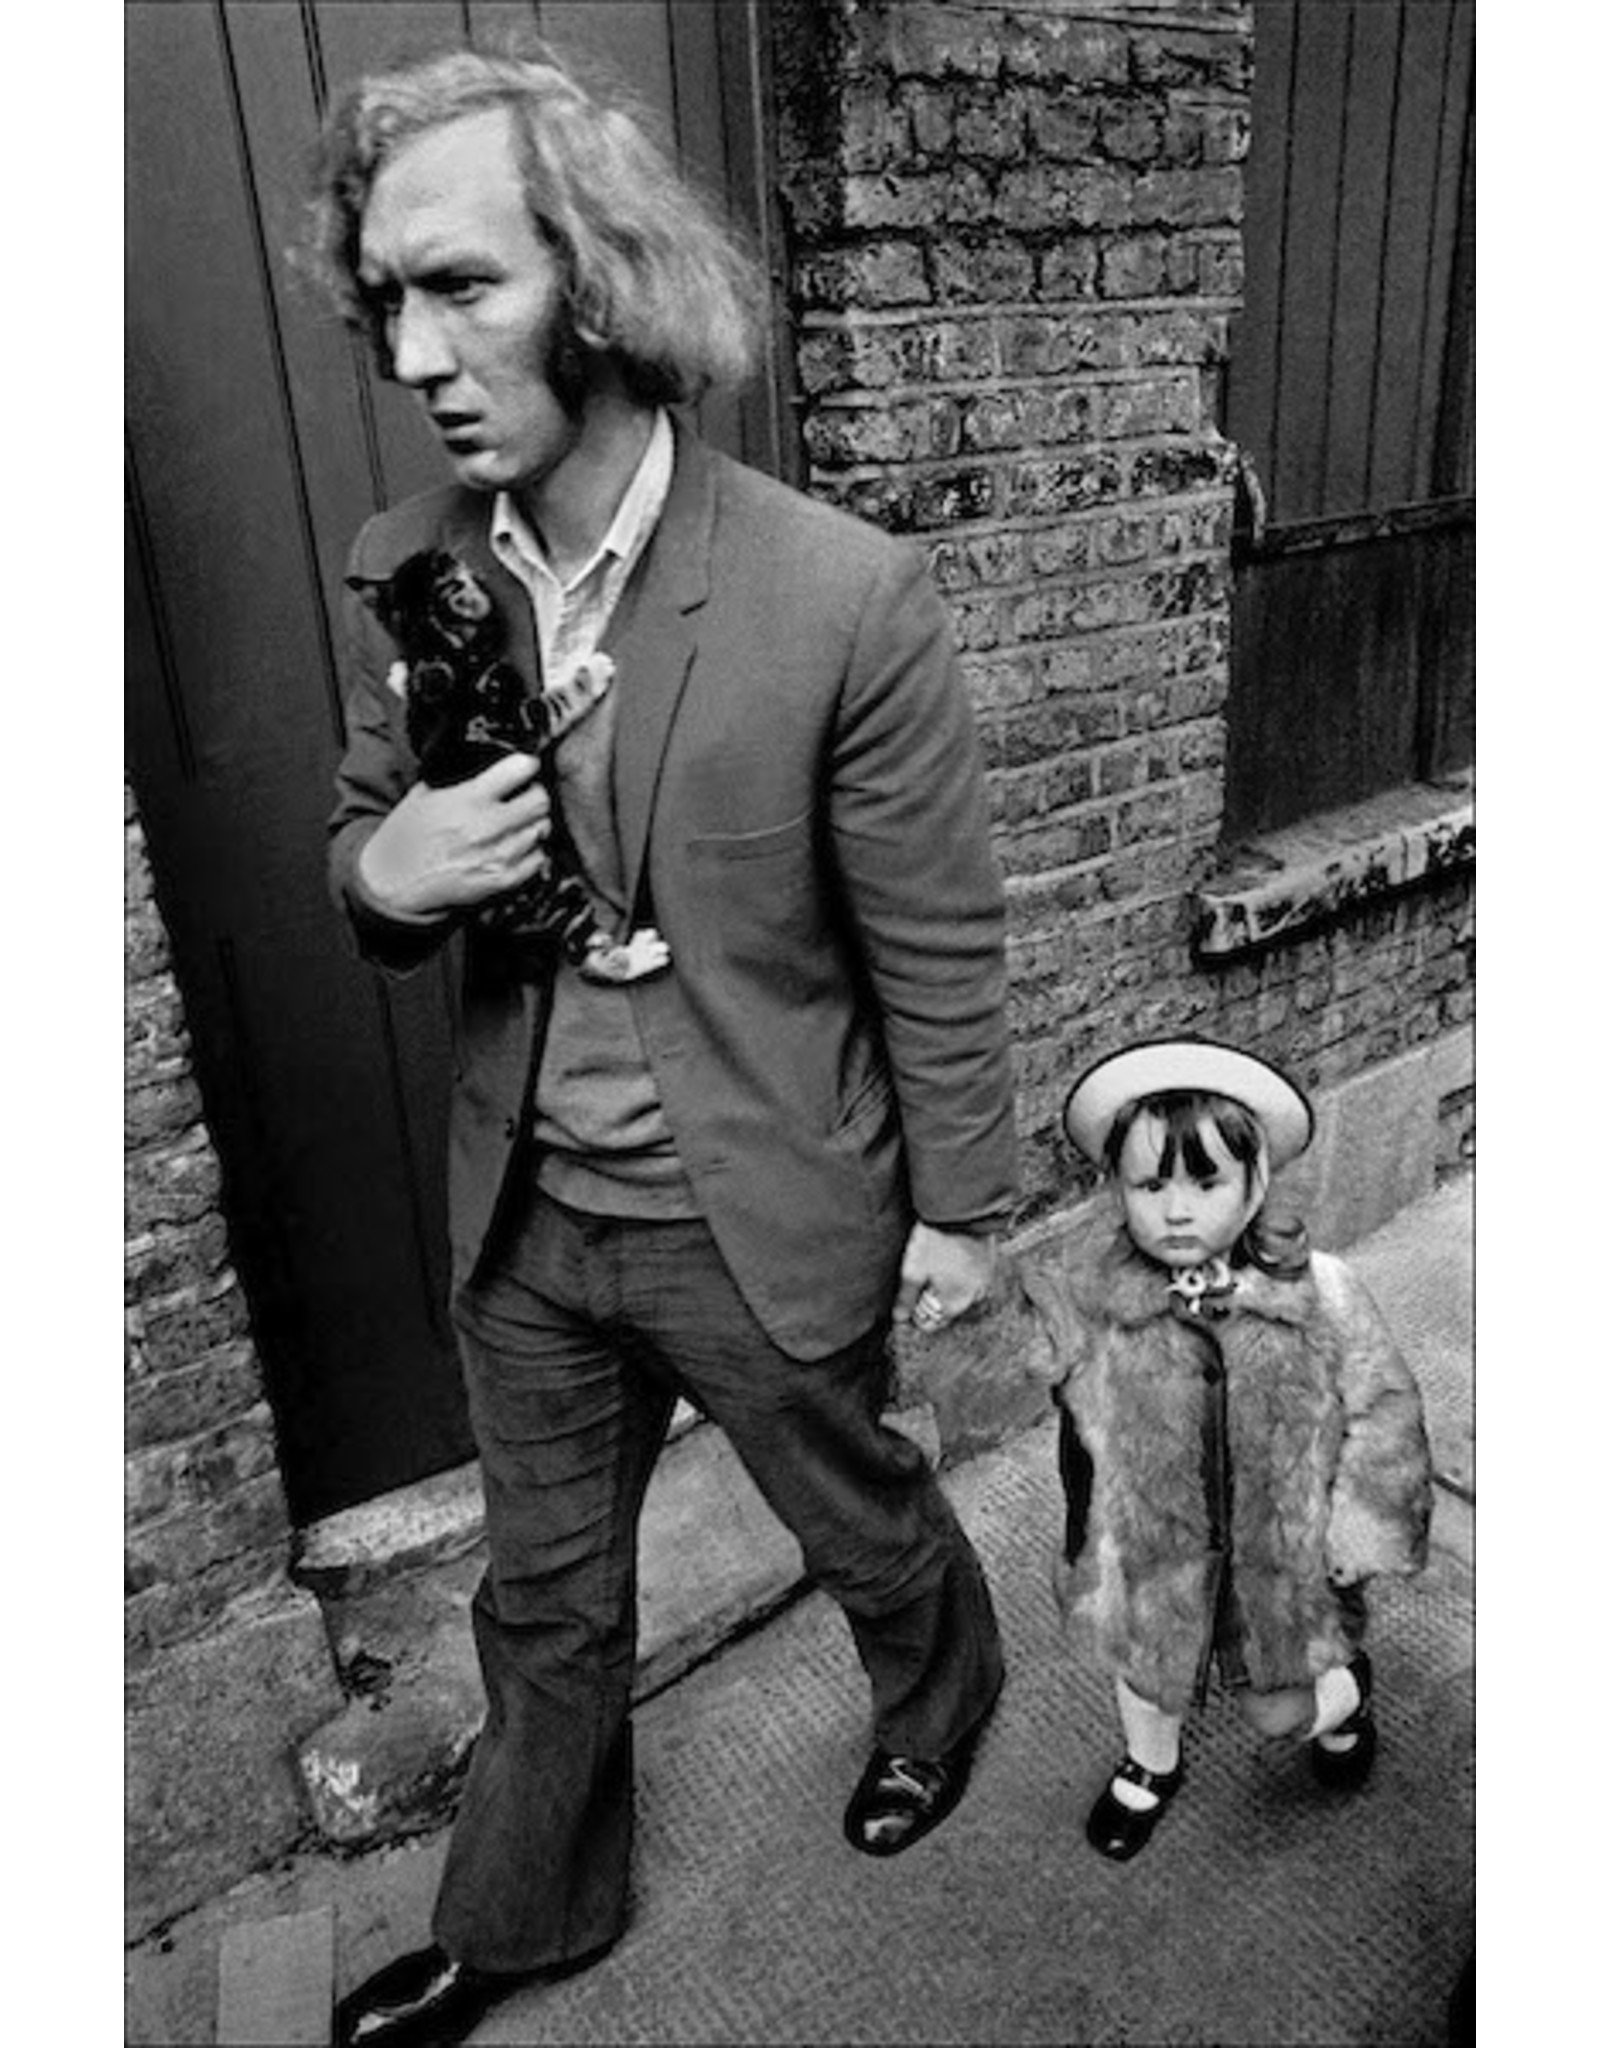 Ian Berry Man with His Daughter and Kitten, Whitechapel, London. Ian Berry (8)